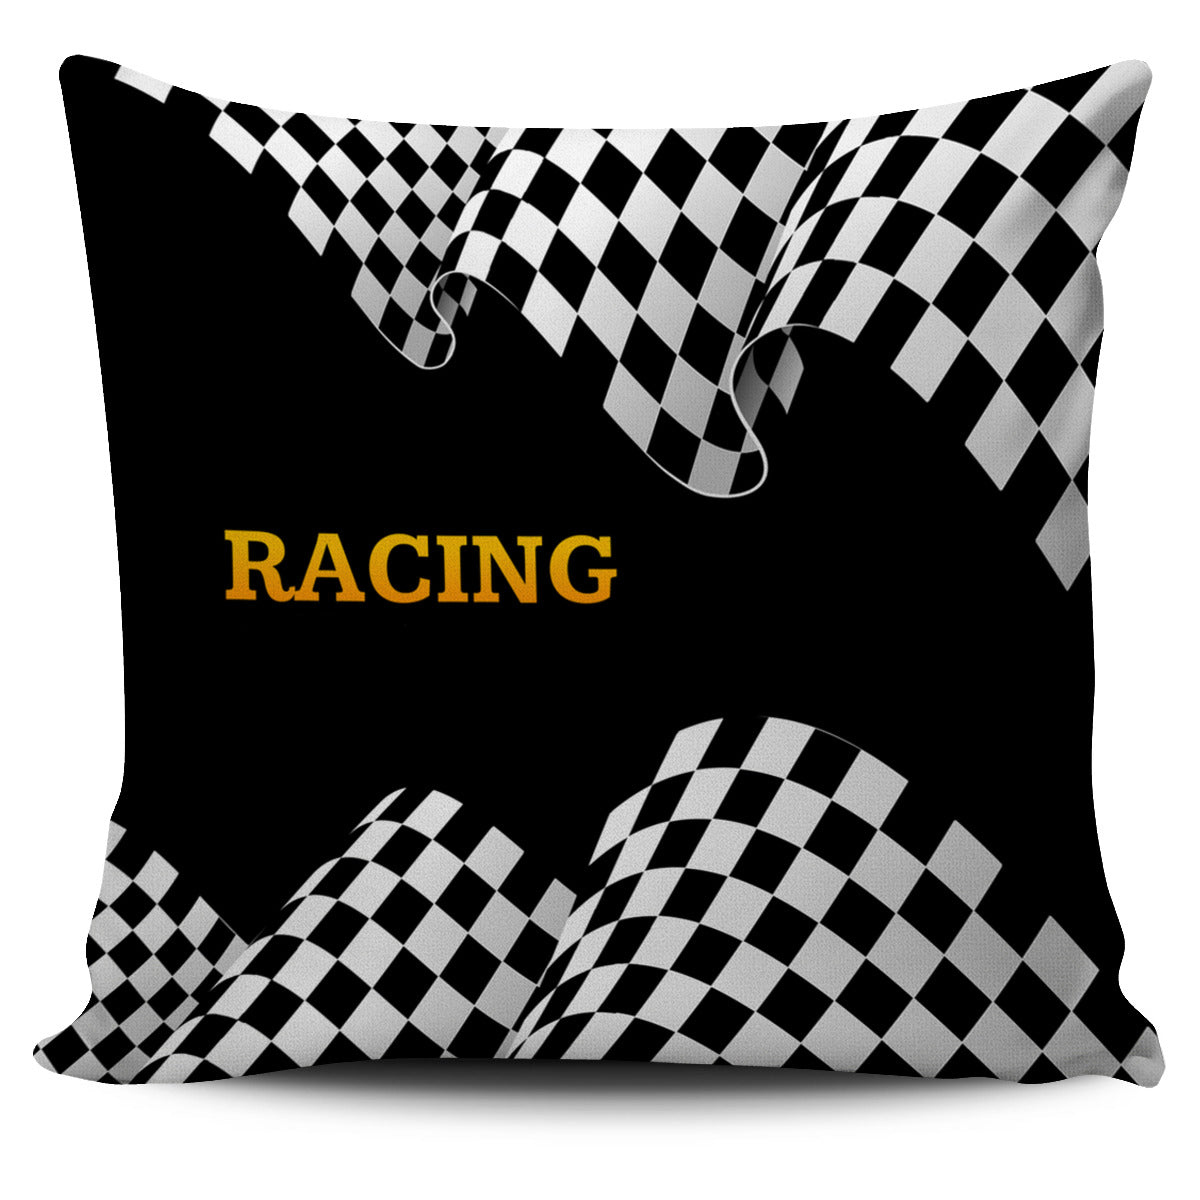 Racing Pillow Cover V10